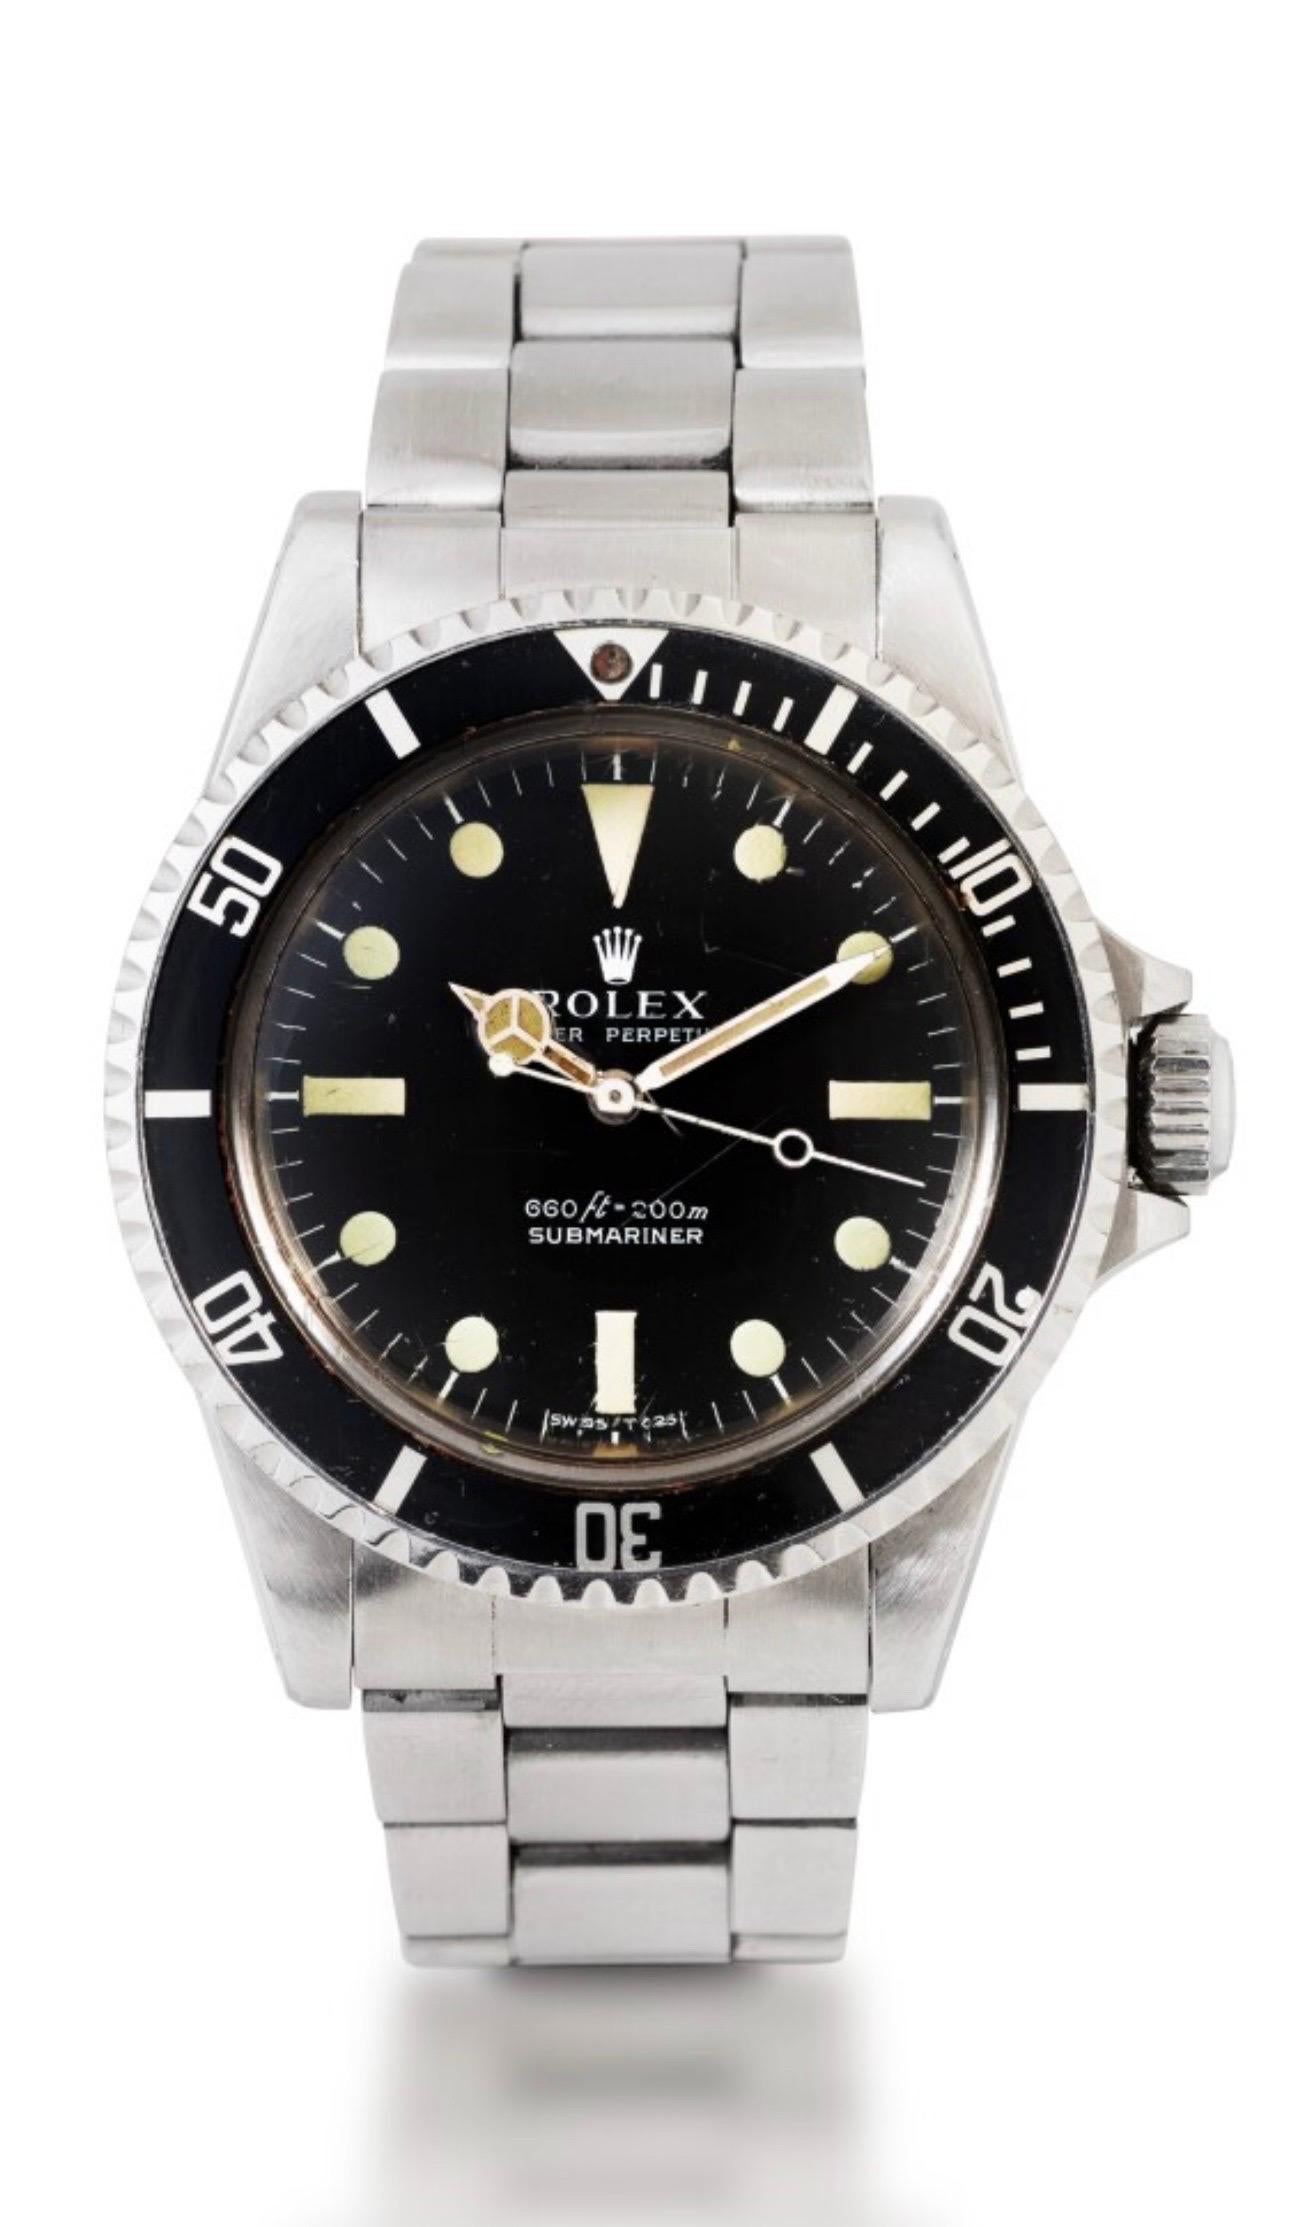 Rolex Submariner (5513) with nice patina from 1978. Stainless steel. 